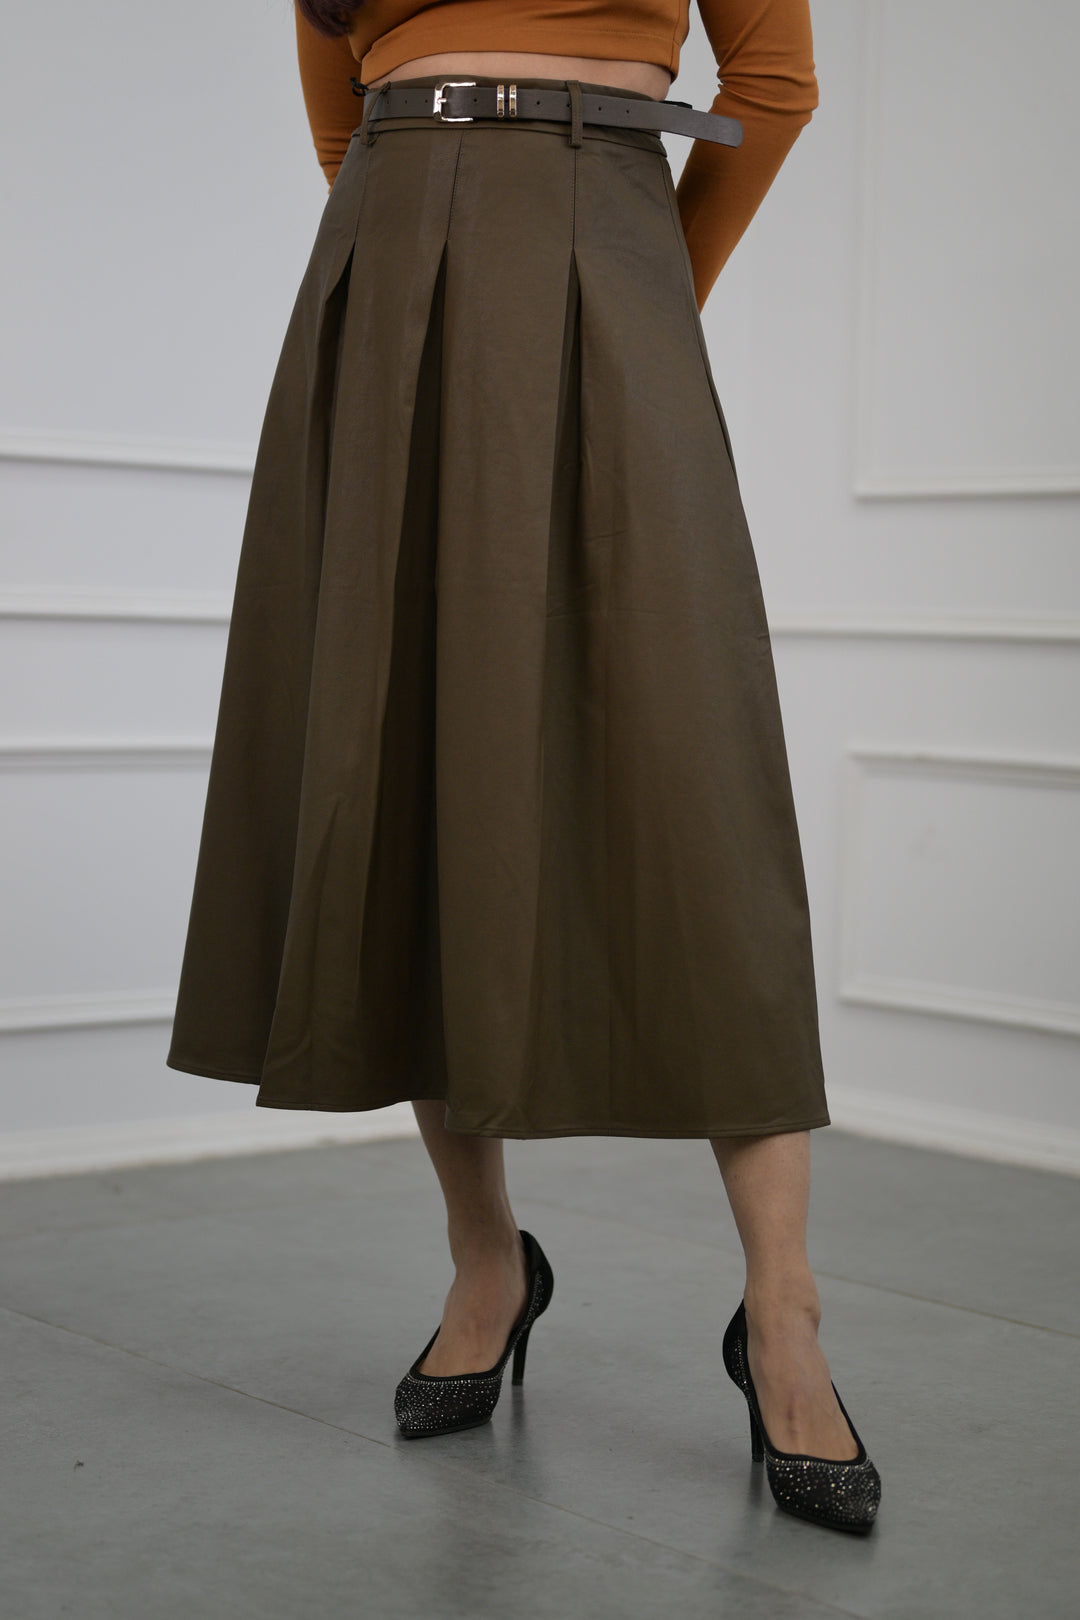 Elegance Box Pleated Faux Leather Skirt with belt